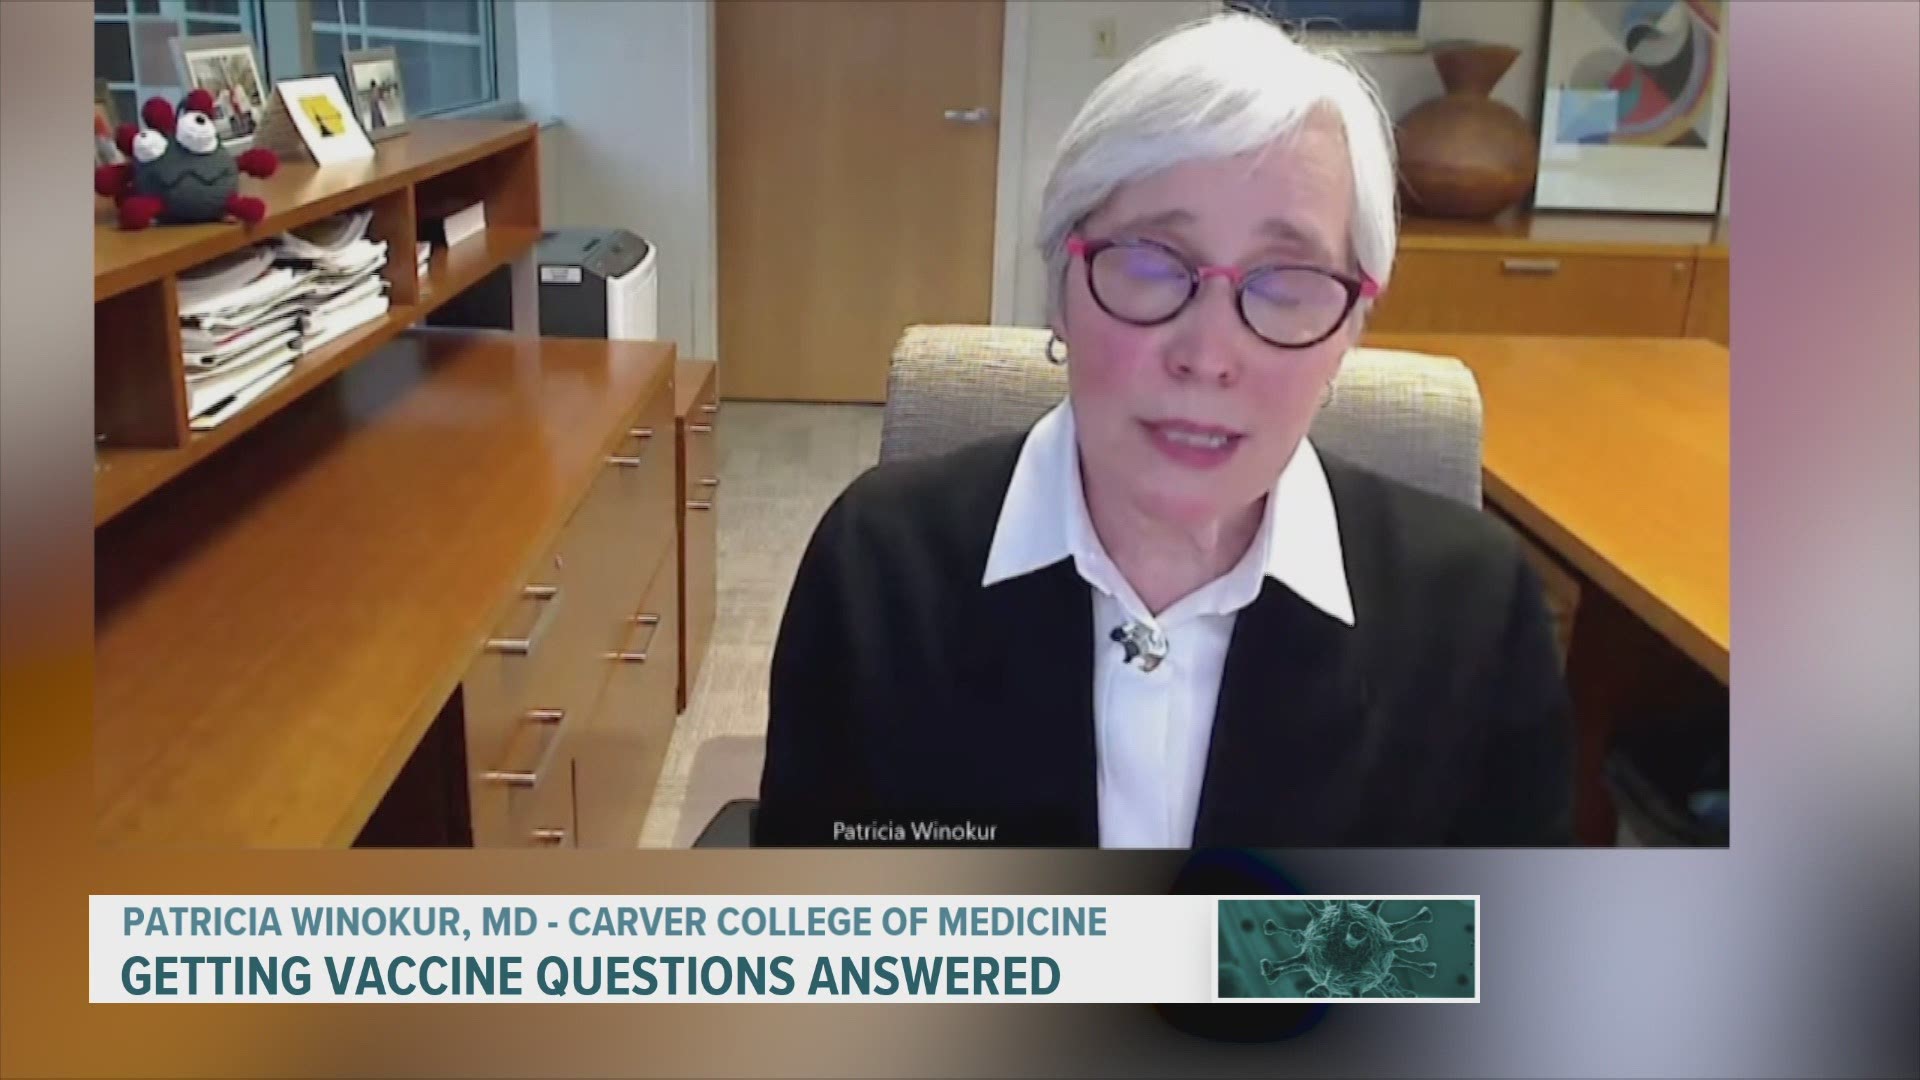 An online forum helped answer questions about the COVID-19 vaccine Monday.